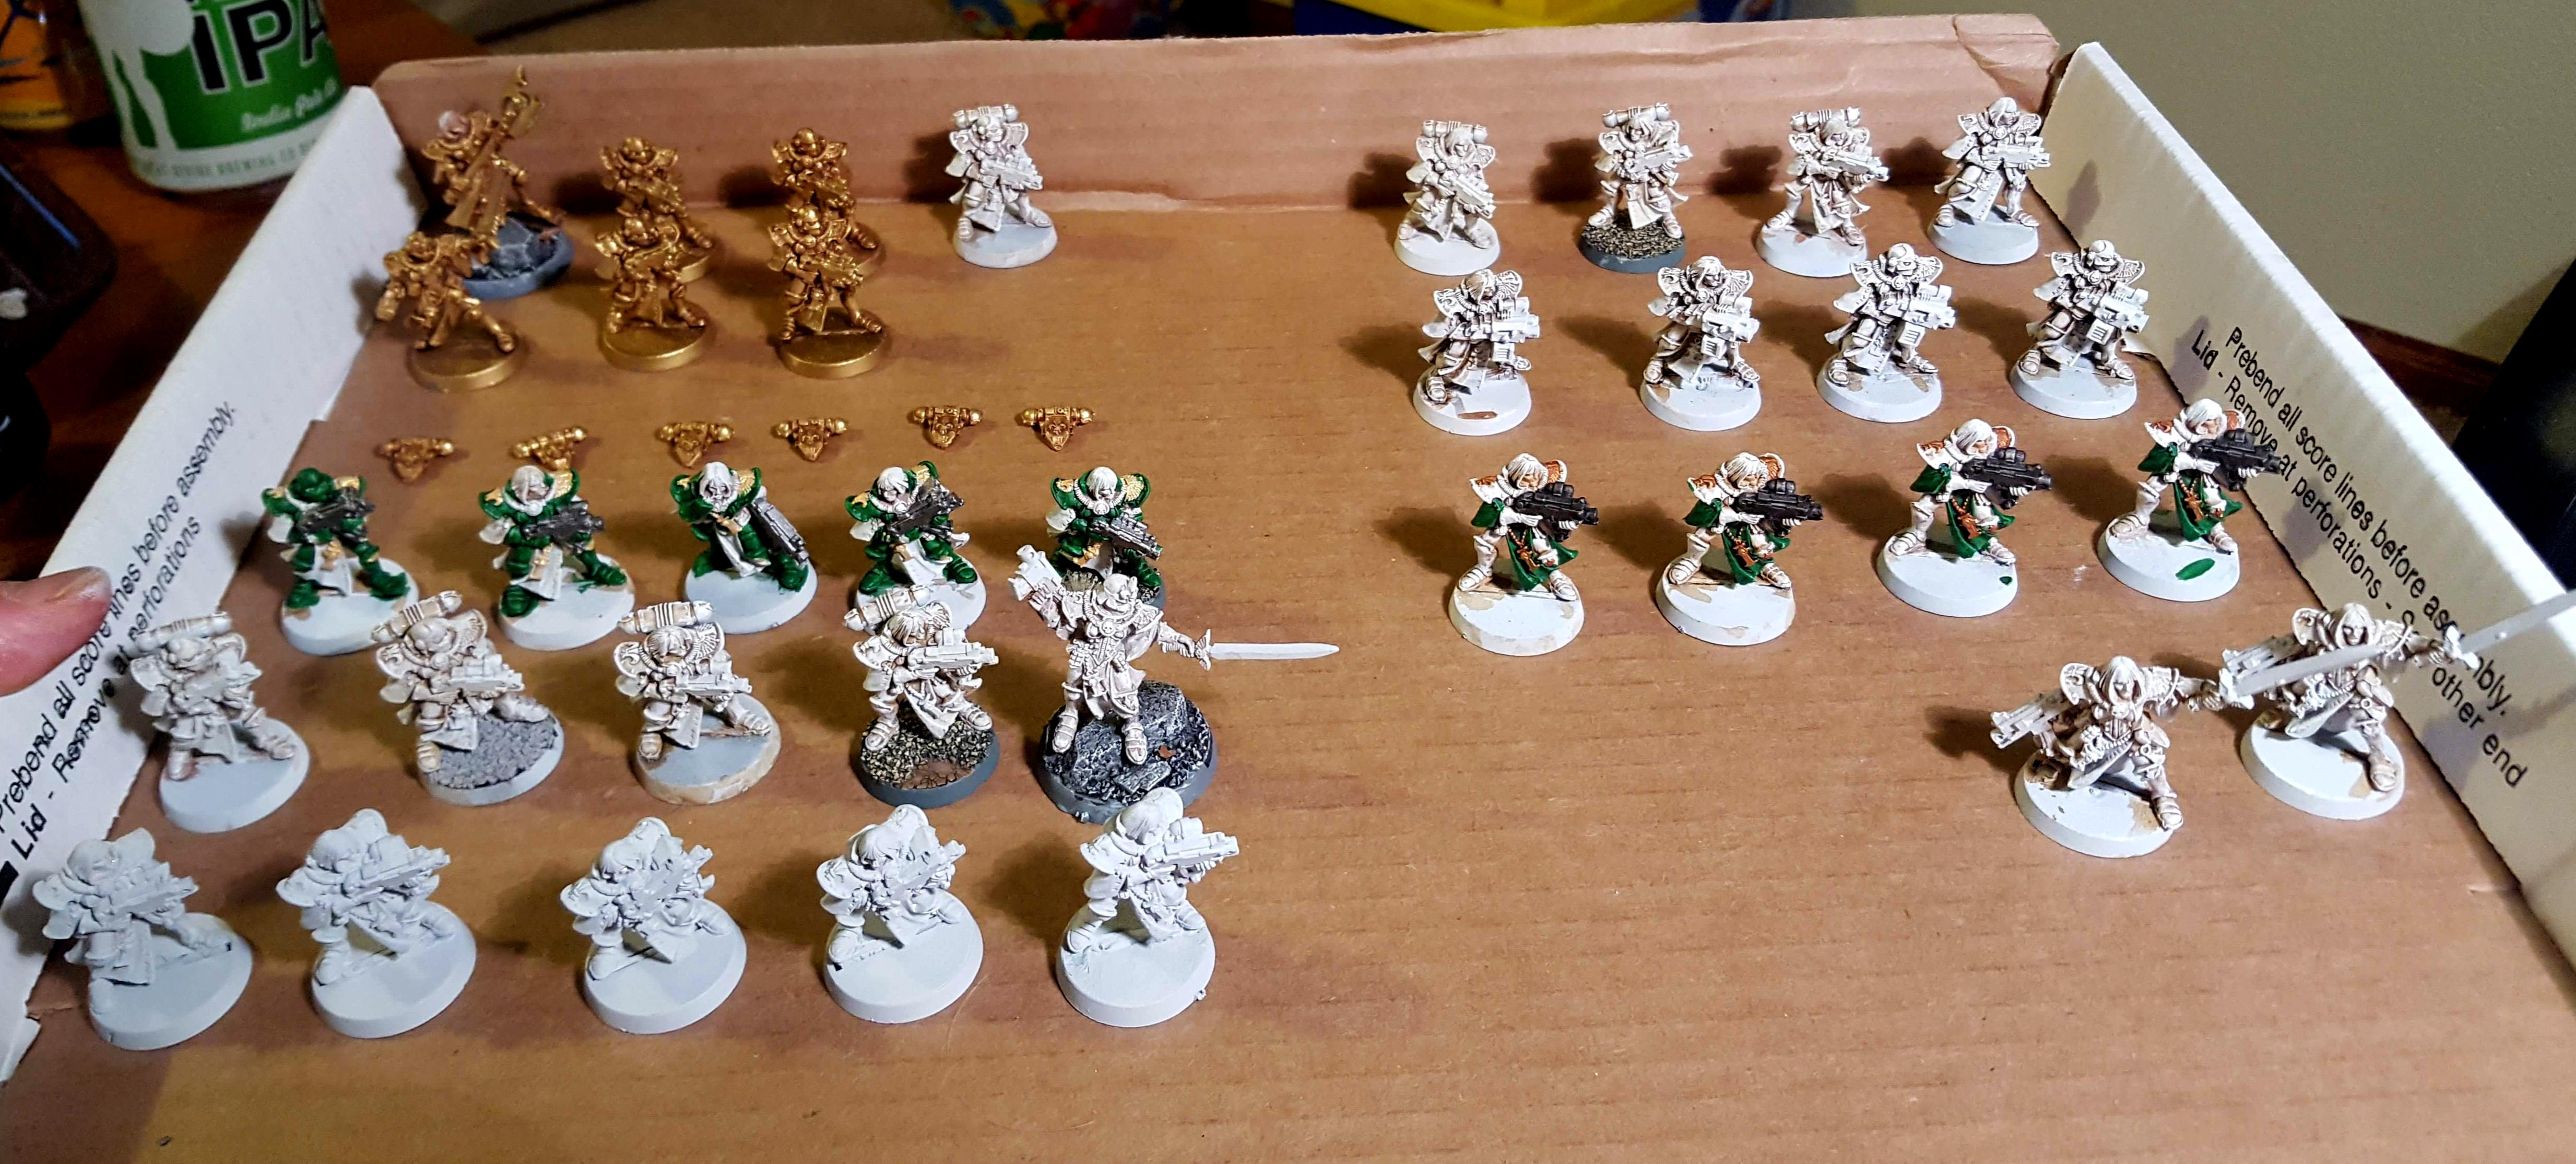 The last of my collection in various states of progress. Time to finish this army!